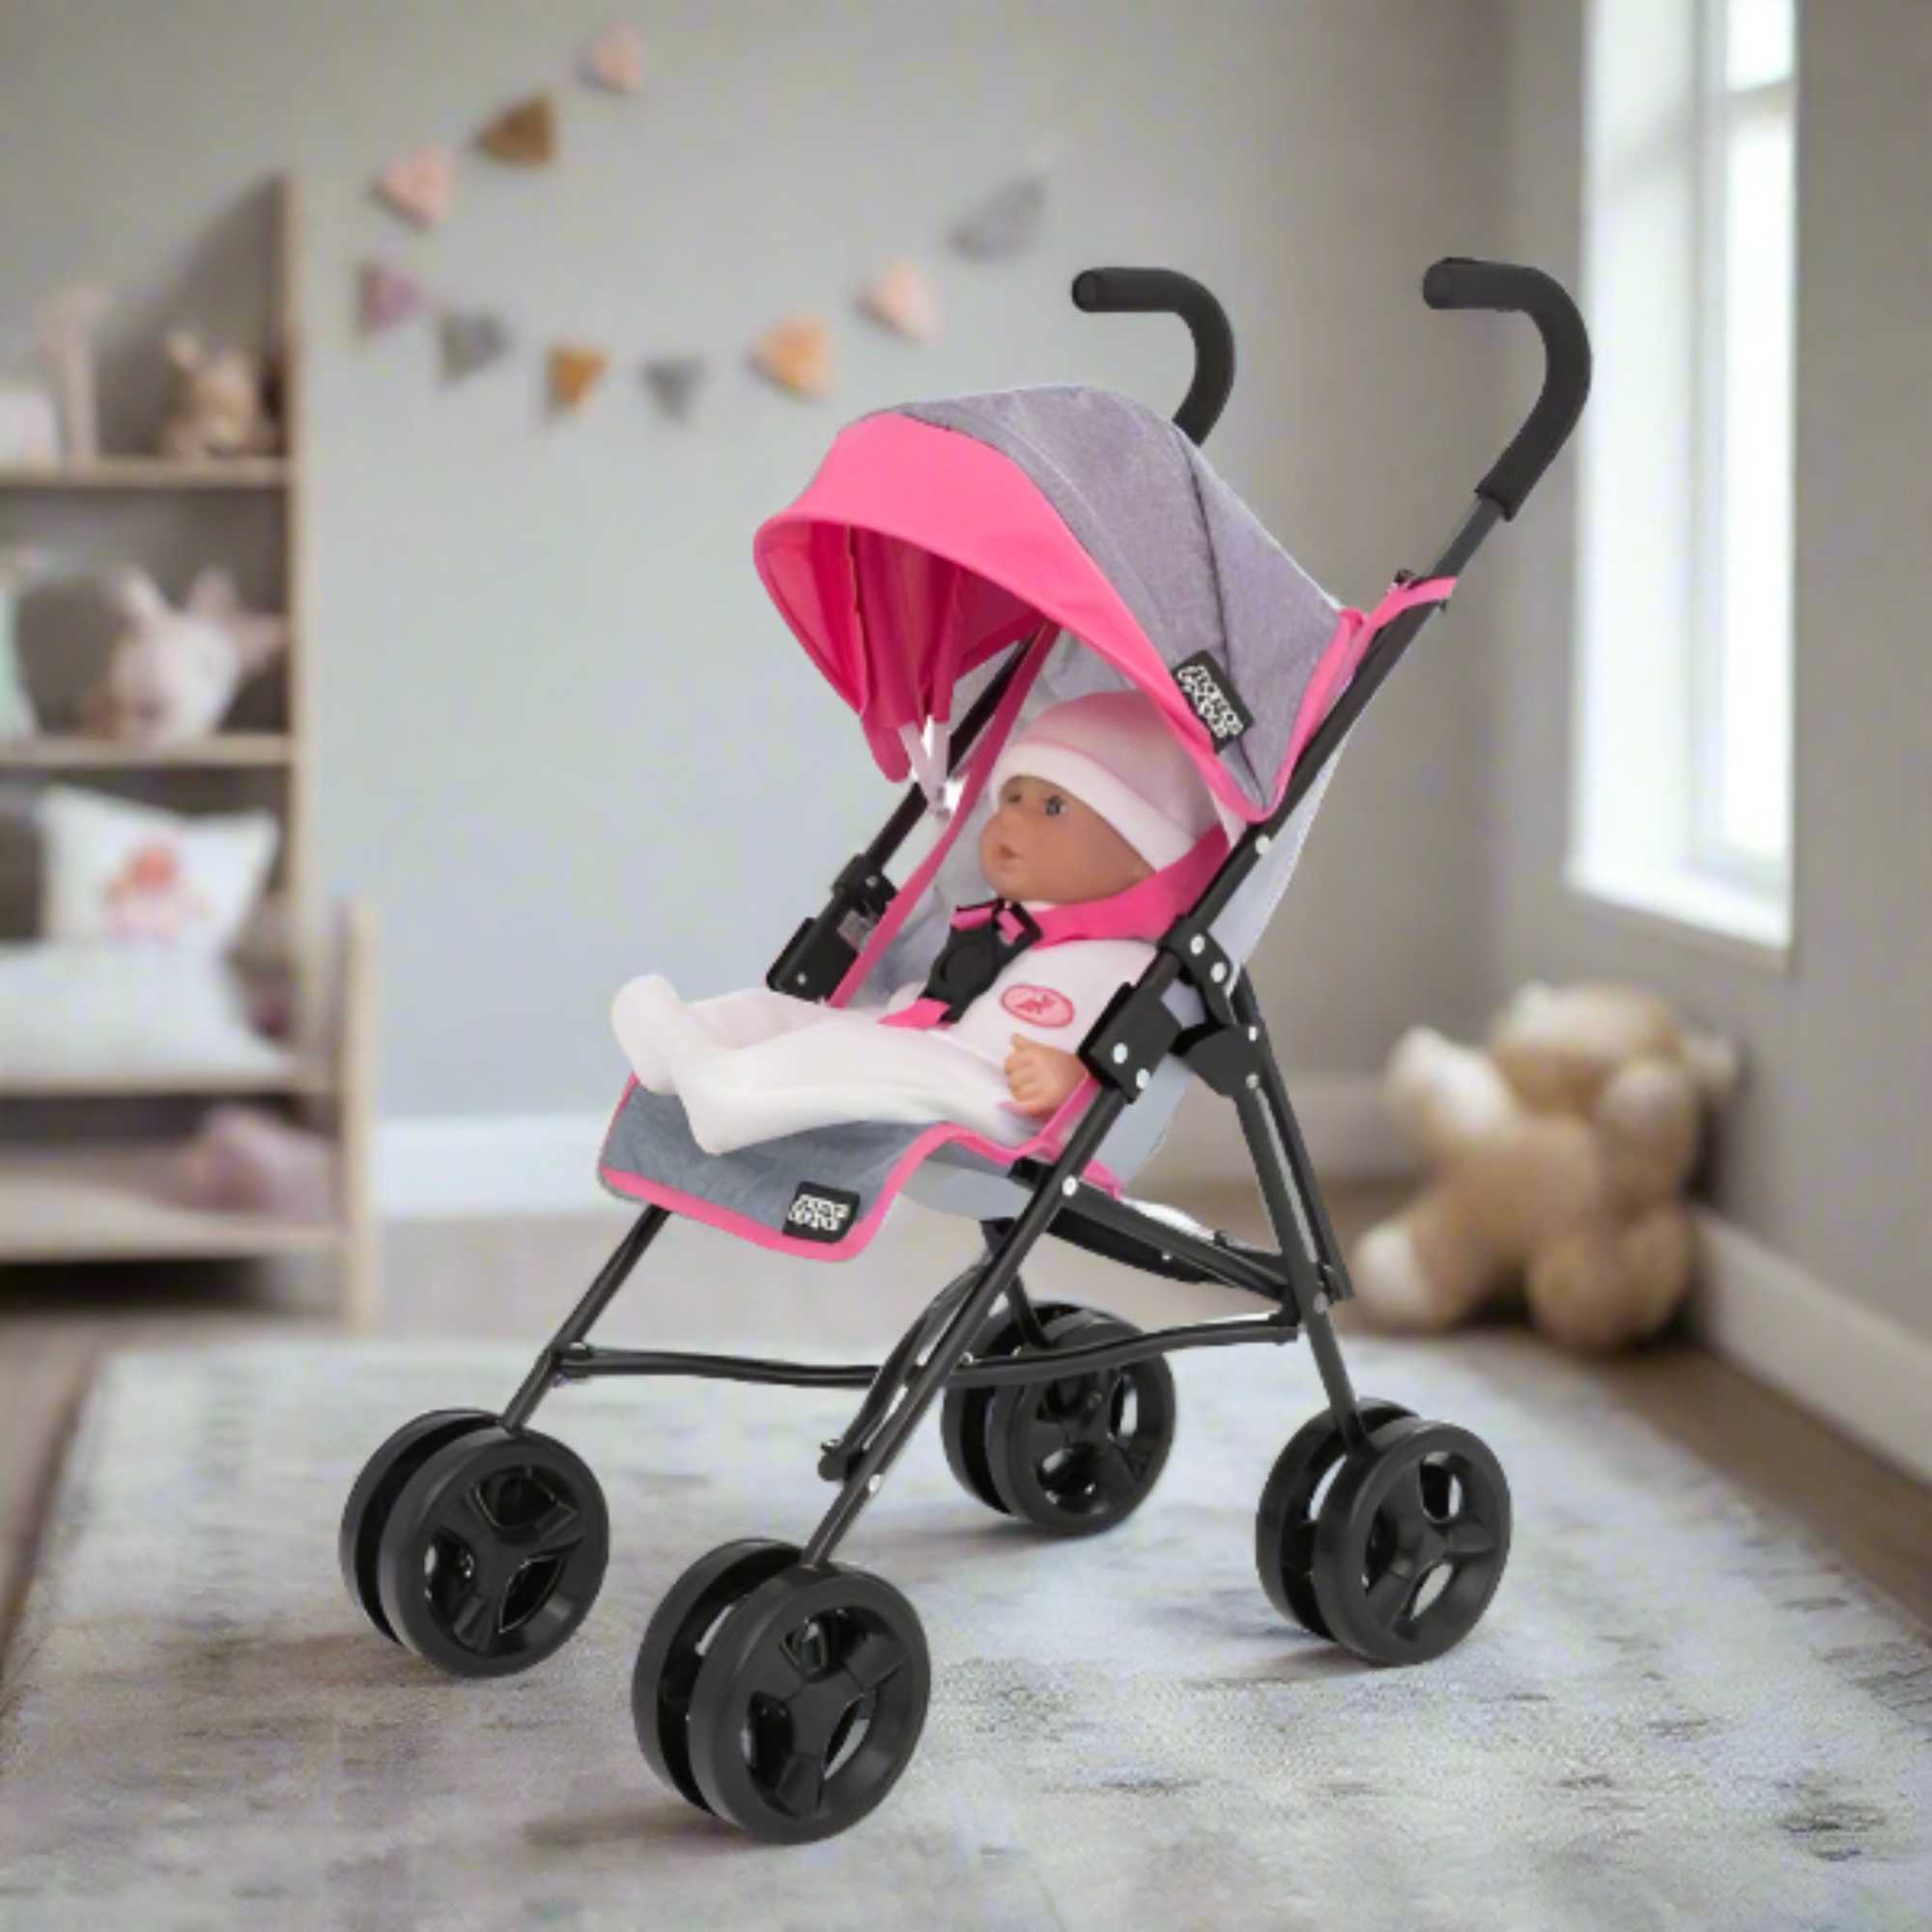 Mamas & Papas Junior Cruise Stroller, designed for children's imaginative play, featuring a sleek and modern design with sturdy frame and smooth-rolling wheels, perfect for pretend outings with dolls.